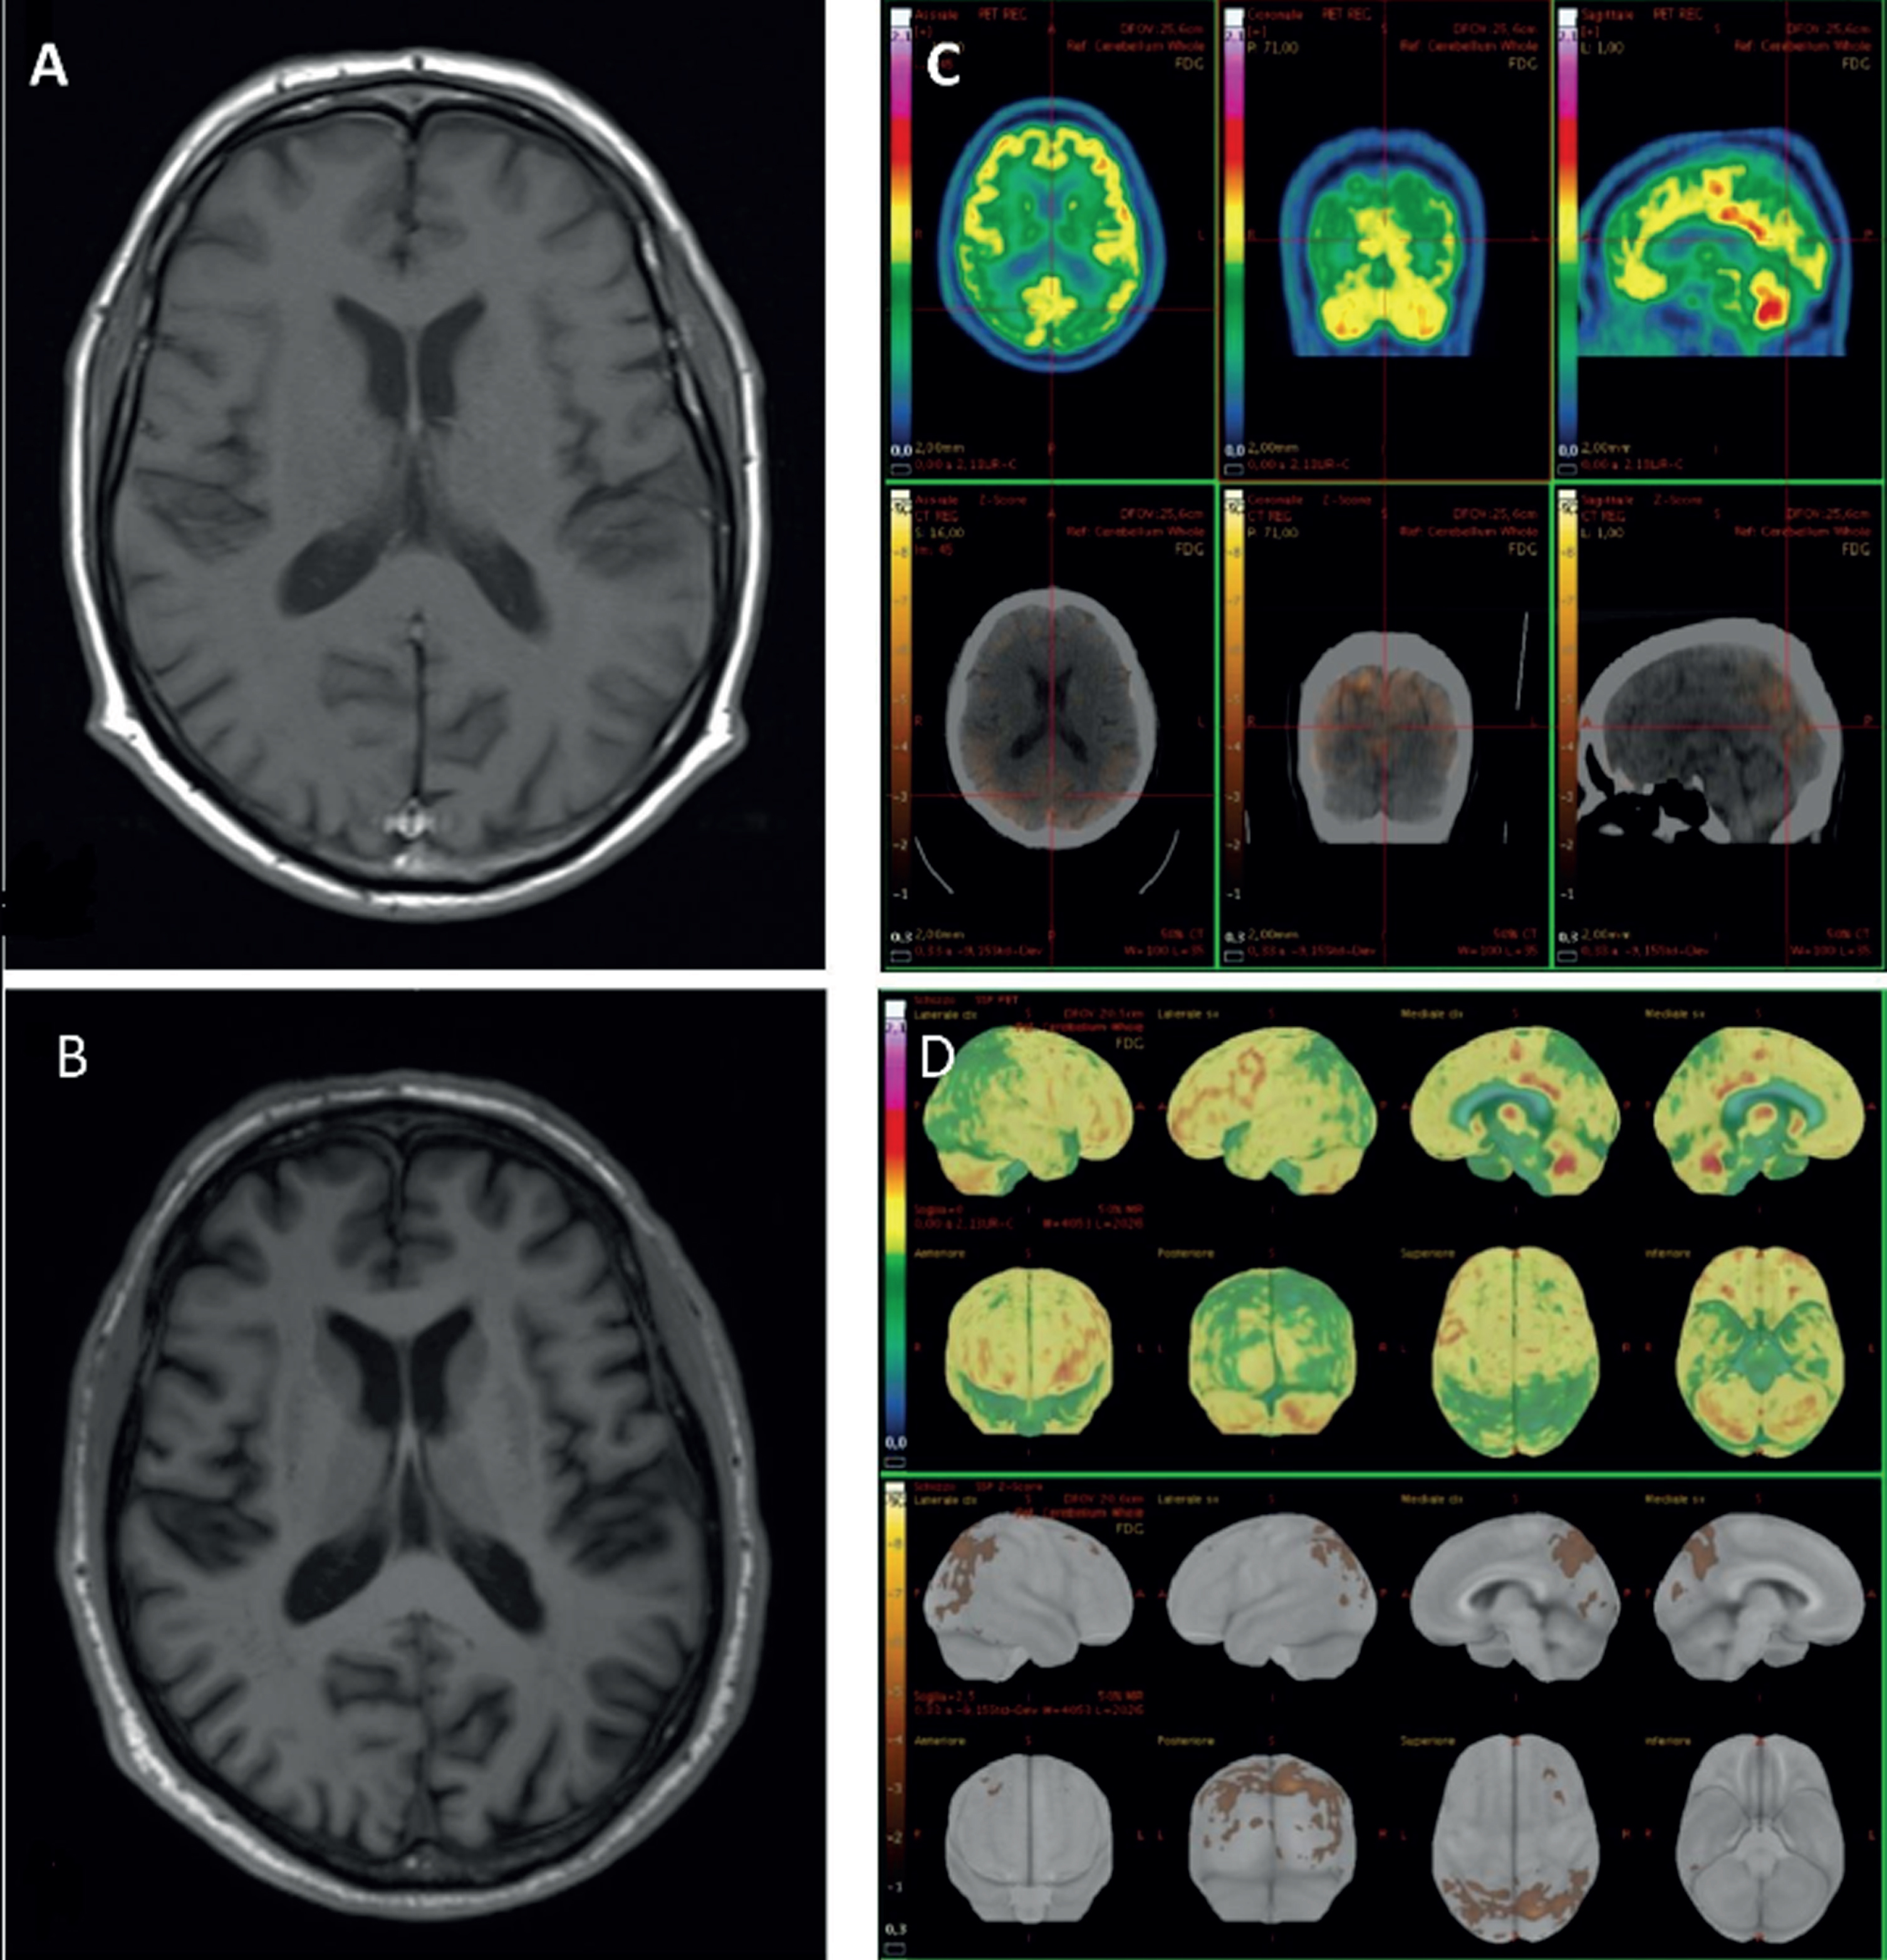 Magnetic resonance imaging (MRI) and fluorodeoxyglucose (FDG)-positron emission tomography (PET) images of our patient. MRI-3T T1w axial slice shows the worsening of parieto-occipital atrophy (A in 2021, B in 2022). FDG-PET axial, coronal, and sagittal slices with correspondent computed tomography slices (C). Z-score maps calculated from FDG-PET imagines exhibited a significant bilateral precuneus, parietal superior and occipital lateral hypometabolism (D).